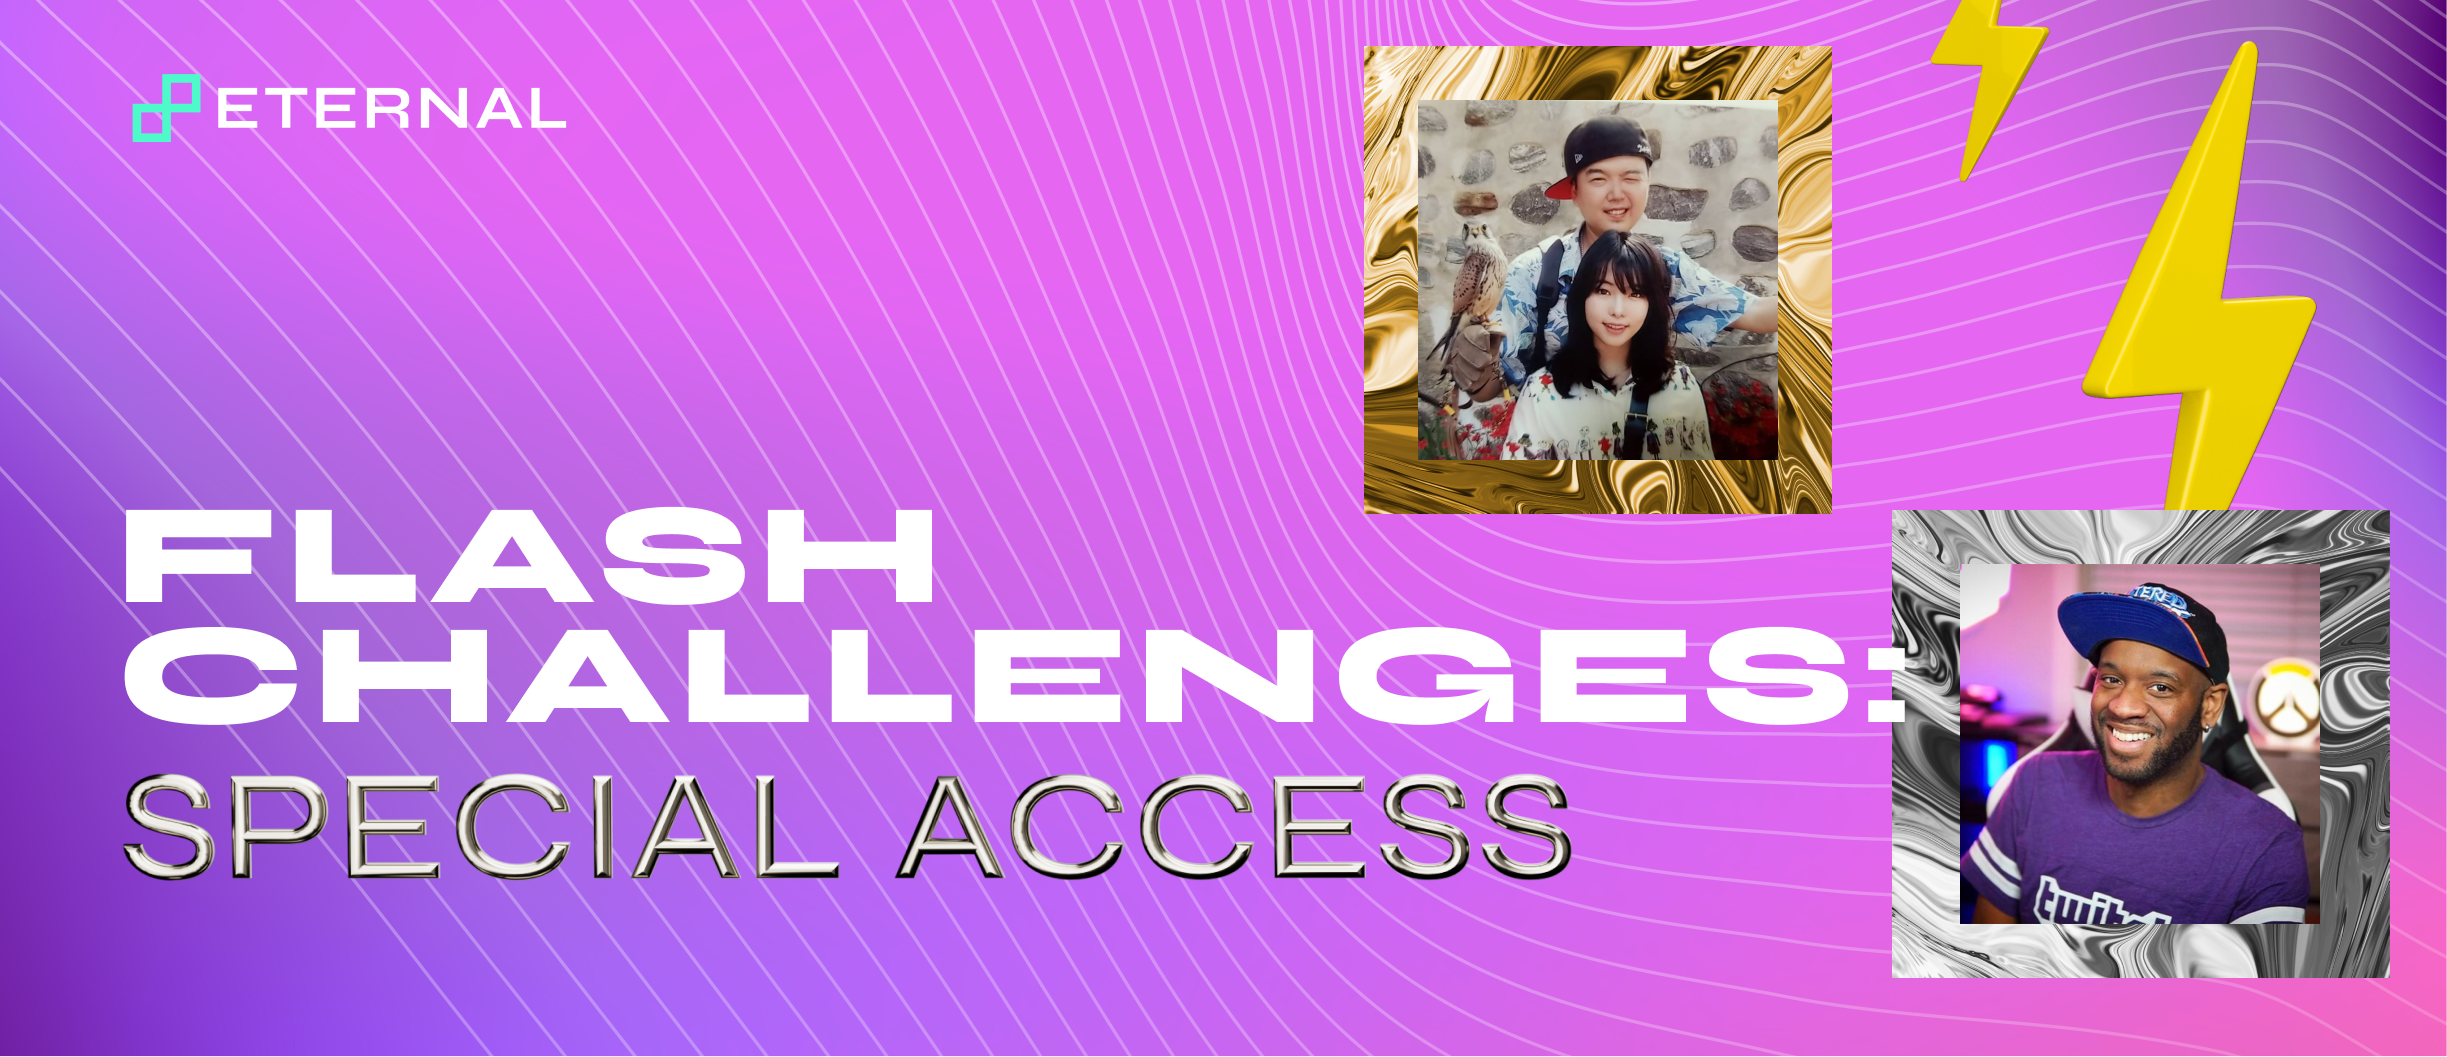 Flash Challenges: Special Access